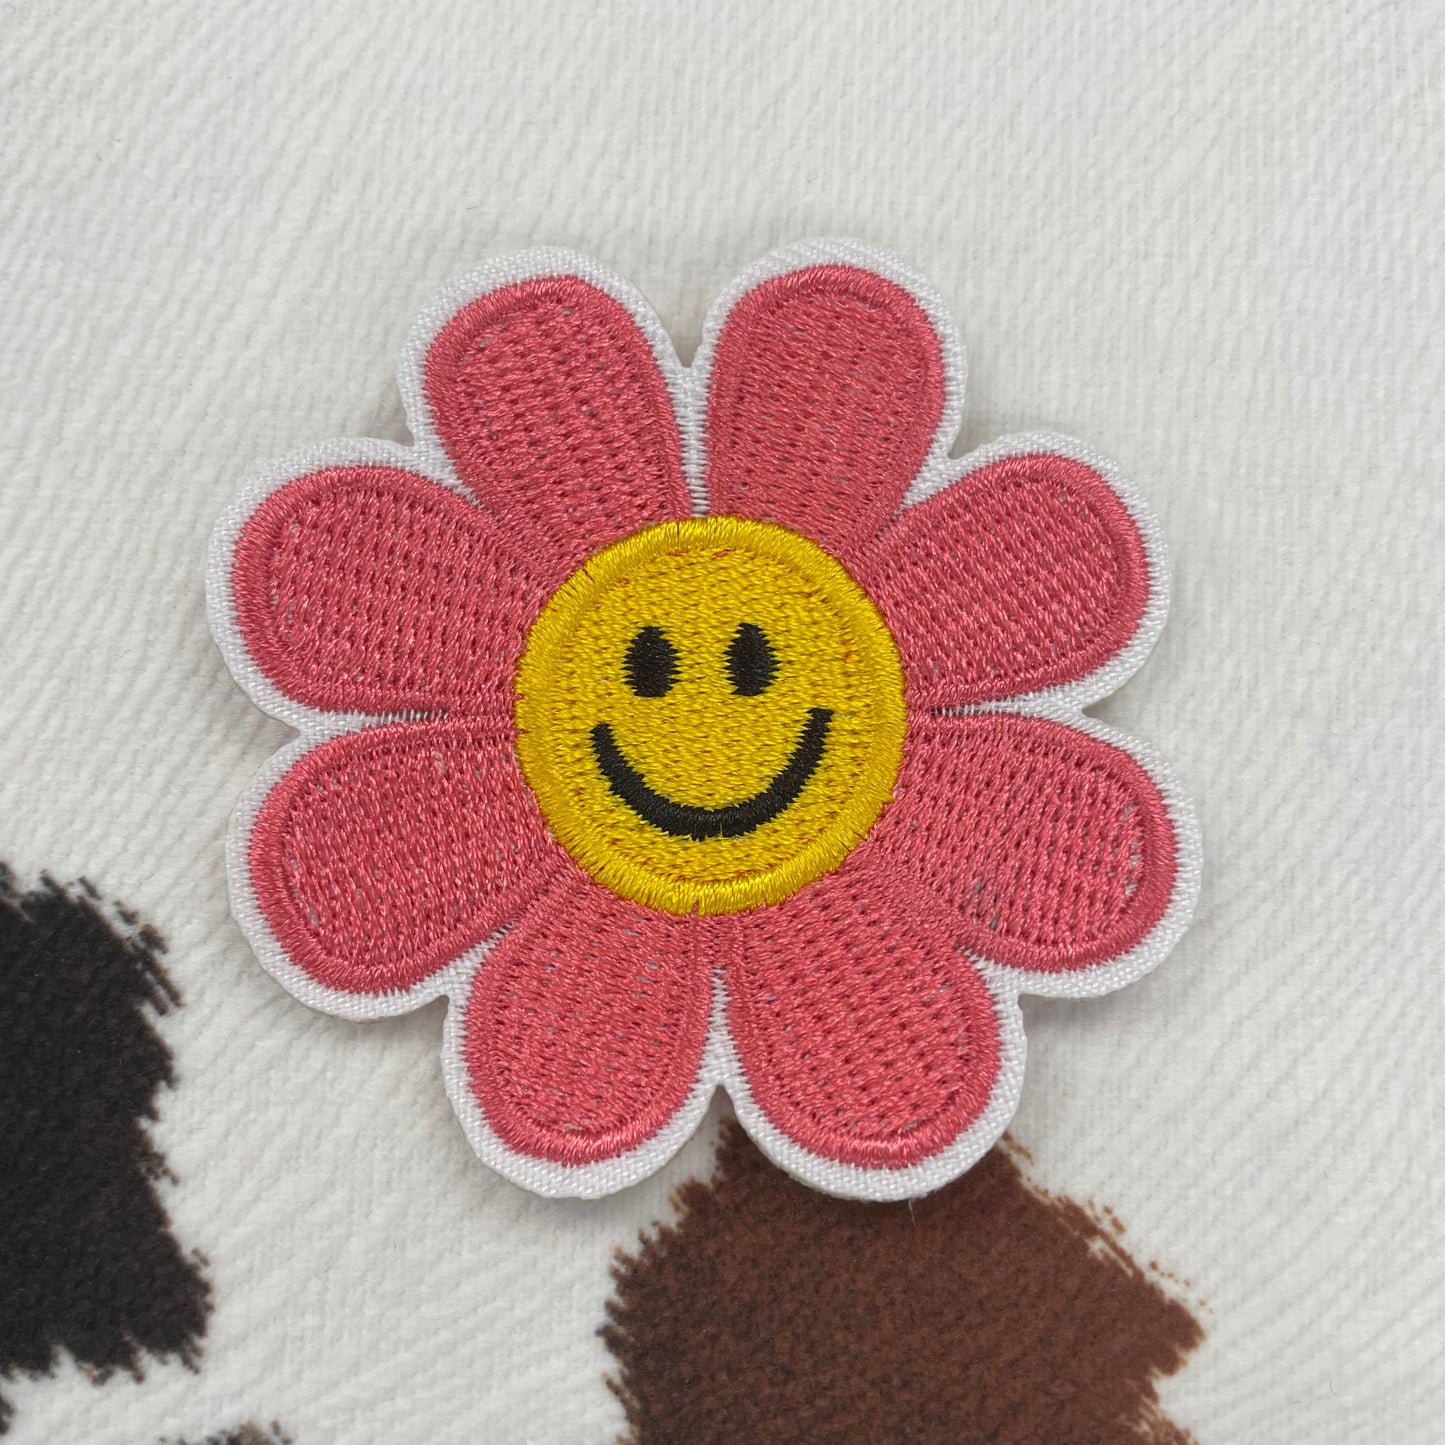 Smiley Flower- 2.4" wide Embroidery Patch